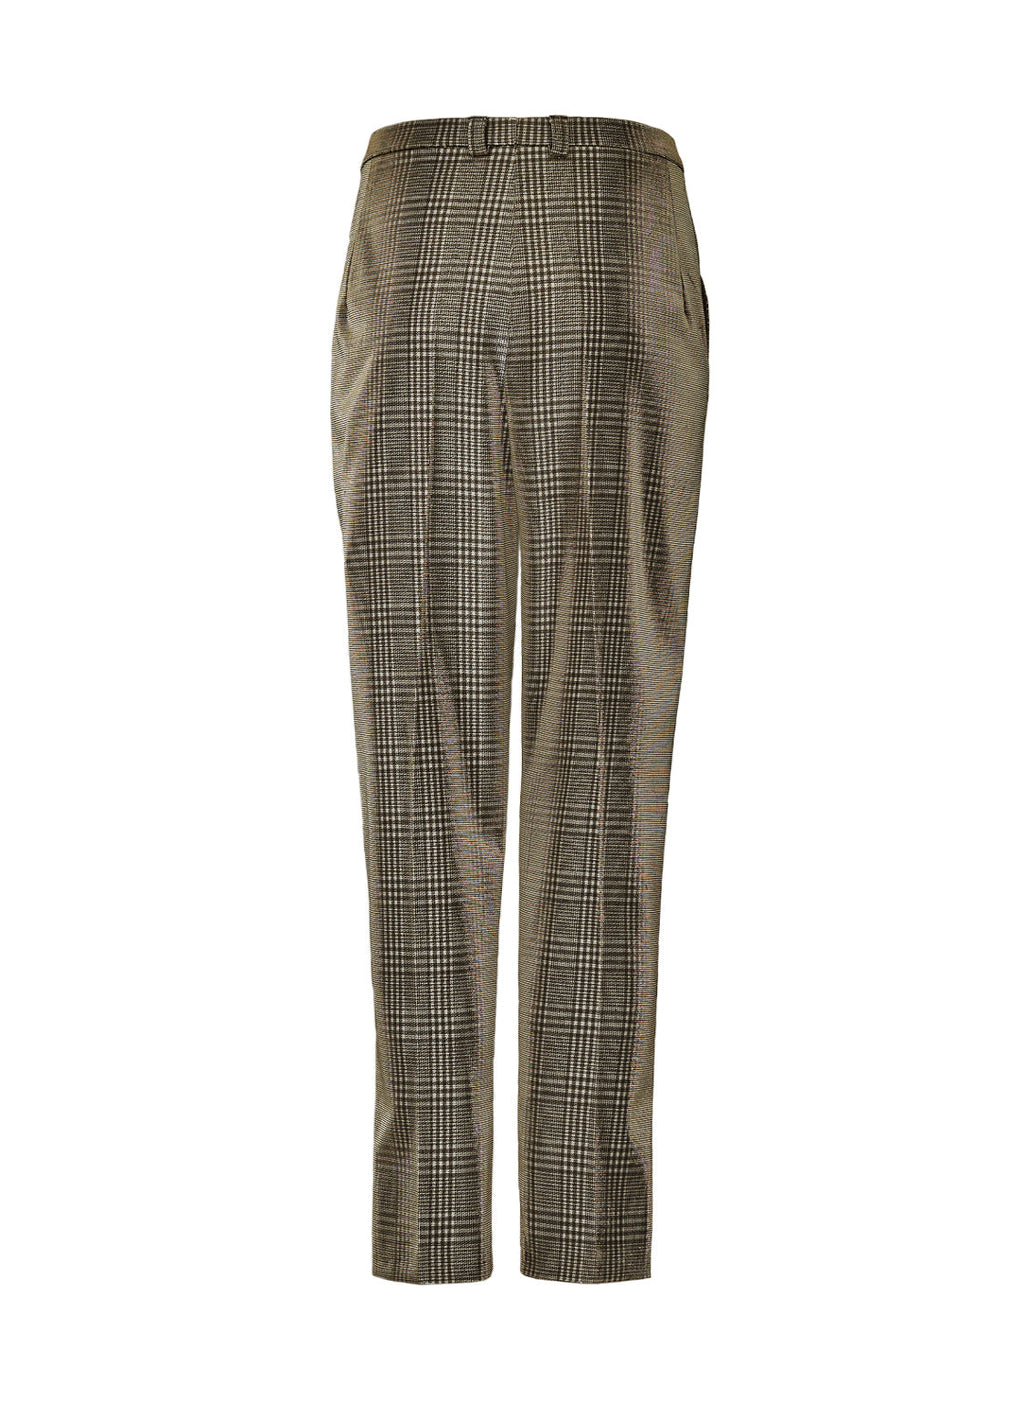 Pleated pants with belt loops